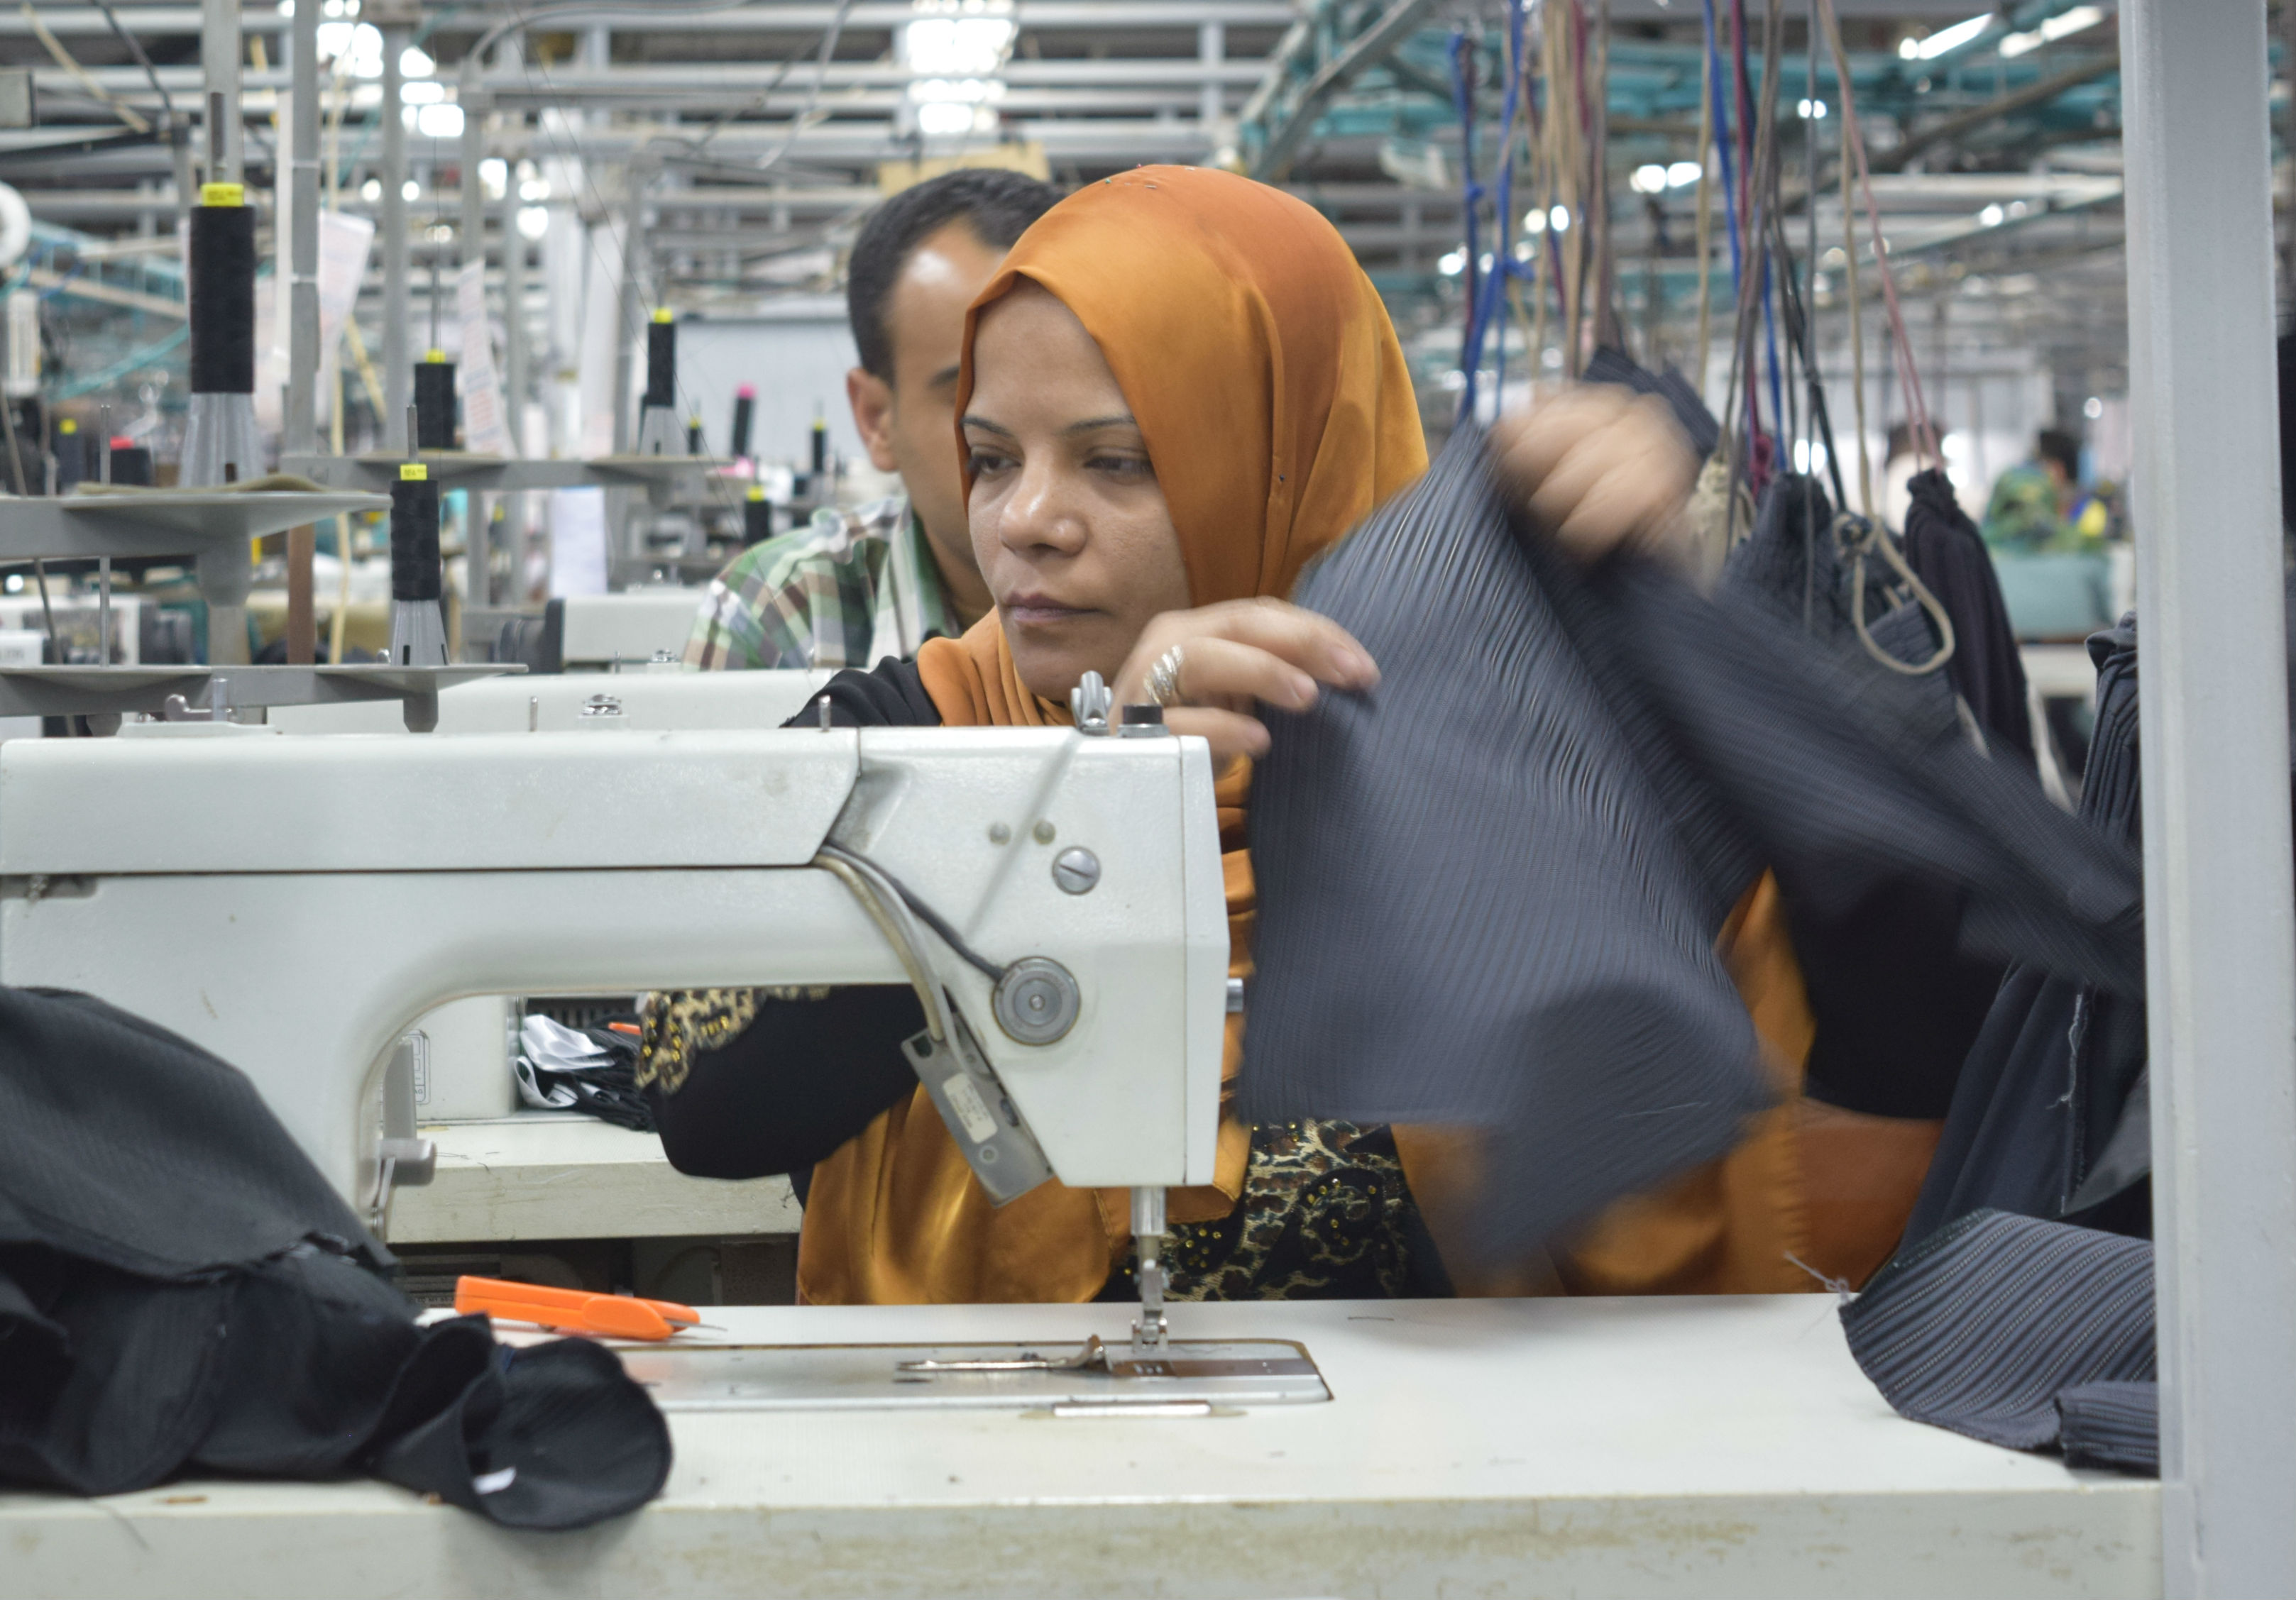 Egypt is considered a basic, ‘cut and sew’ sourcing hub, with salaries around $100 a month